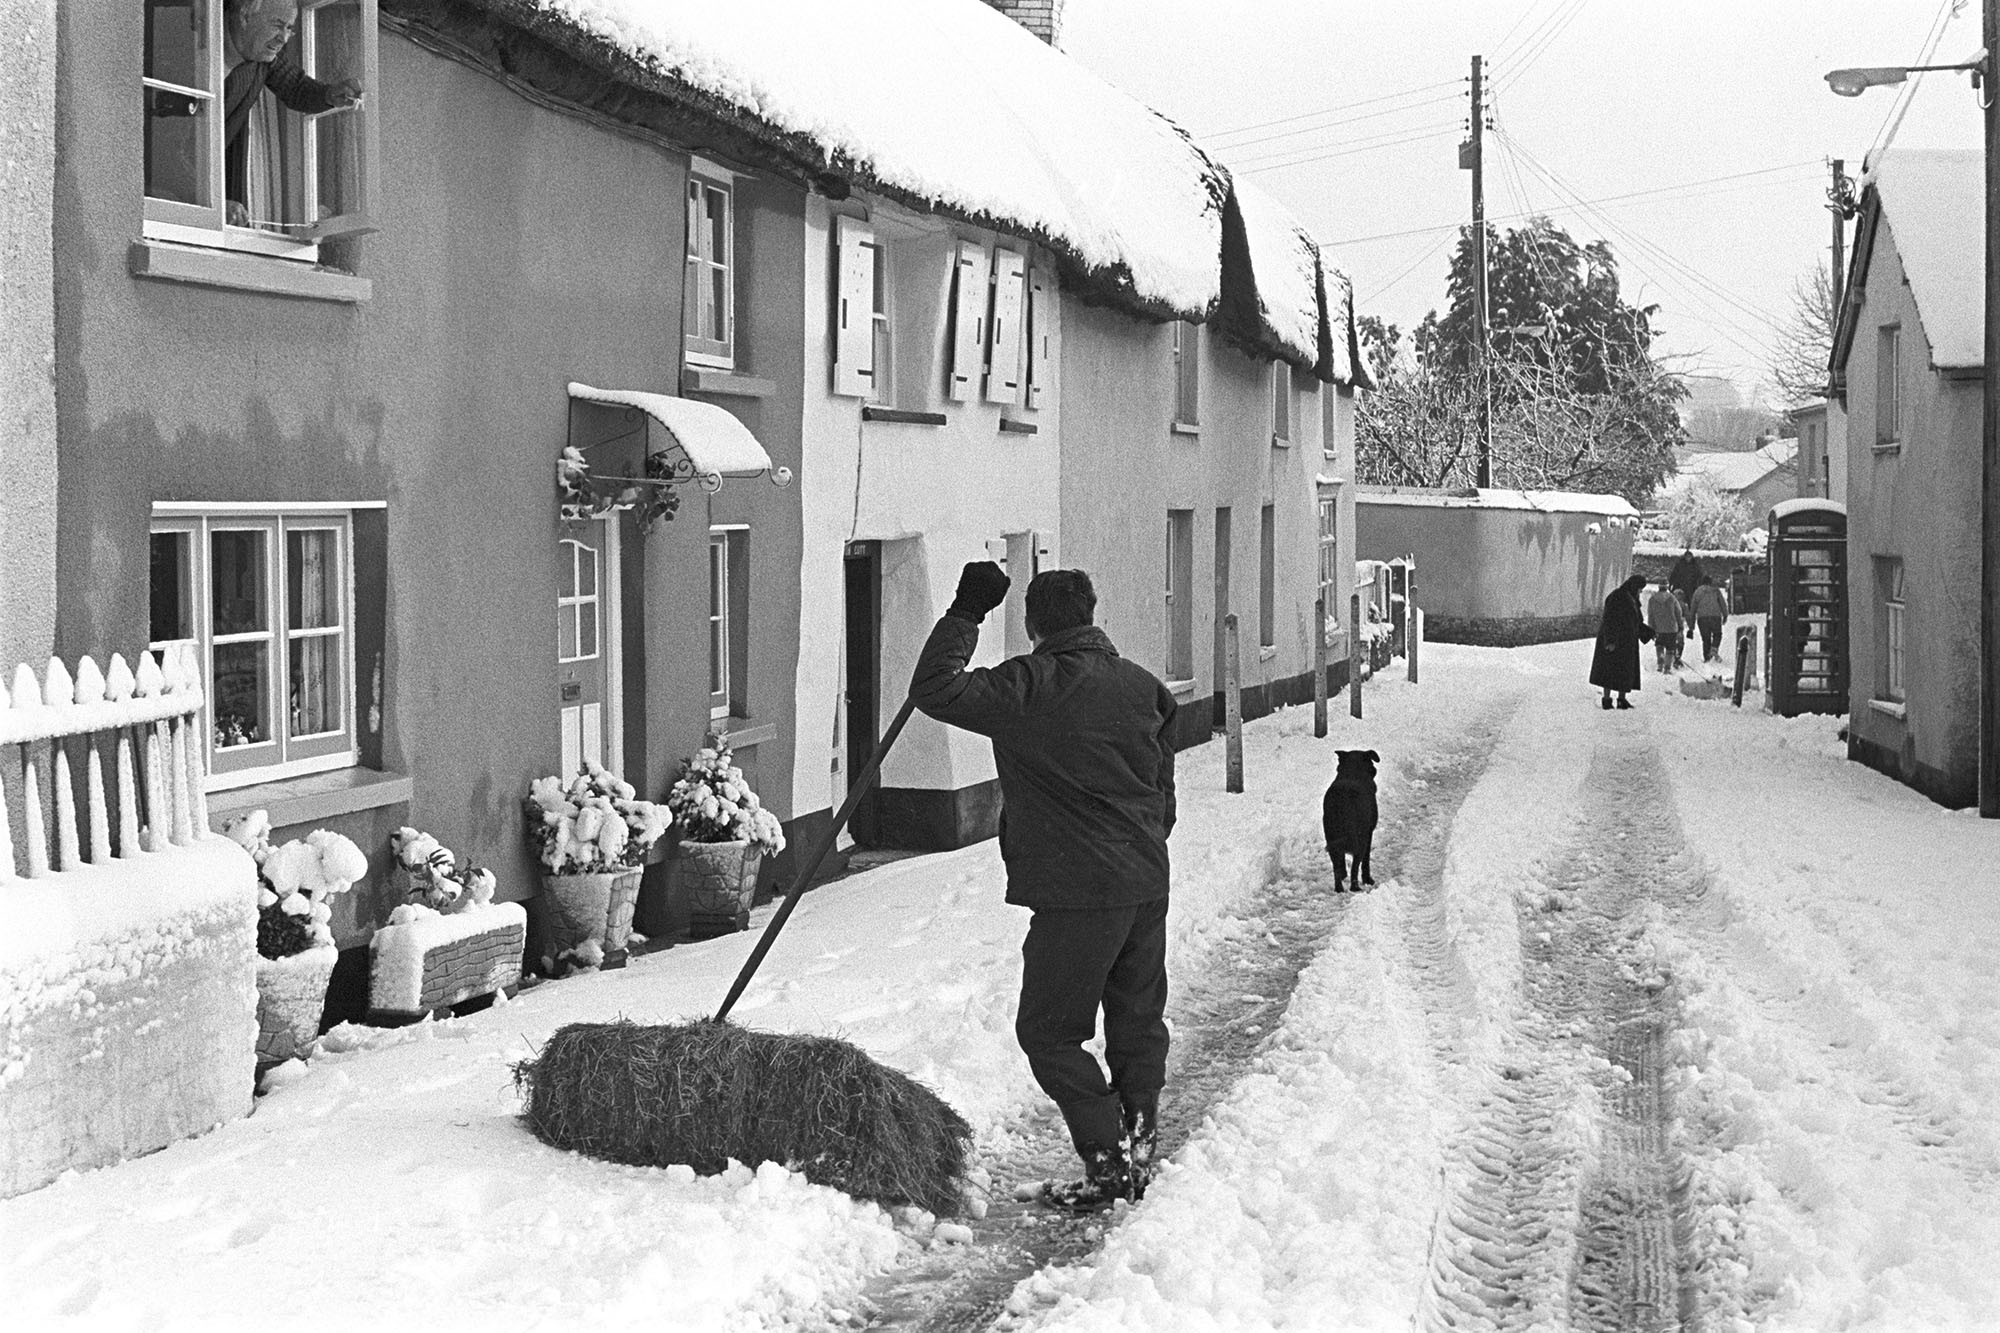 Snow, man chatting in street on the way to sheep with hay.
[A man with a bale of hay, possibly Harold Nott, standing in front of a thatched cottage in Fore Street, Dolton, on his way to feed sheep in the snow. He is talking to a man leaning out of a cottage window. Further down the street are a group of people and dog walking through the snow, past a telephone box.]